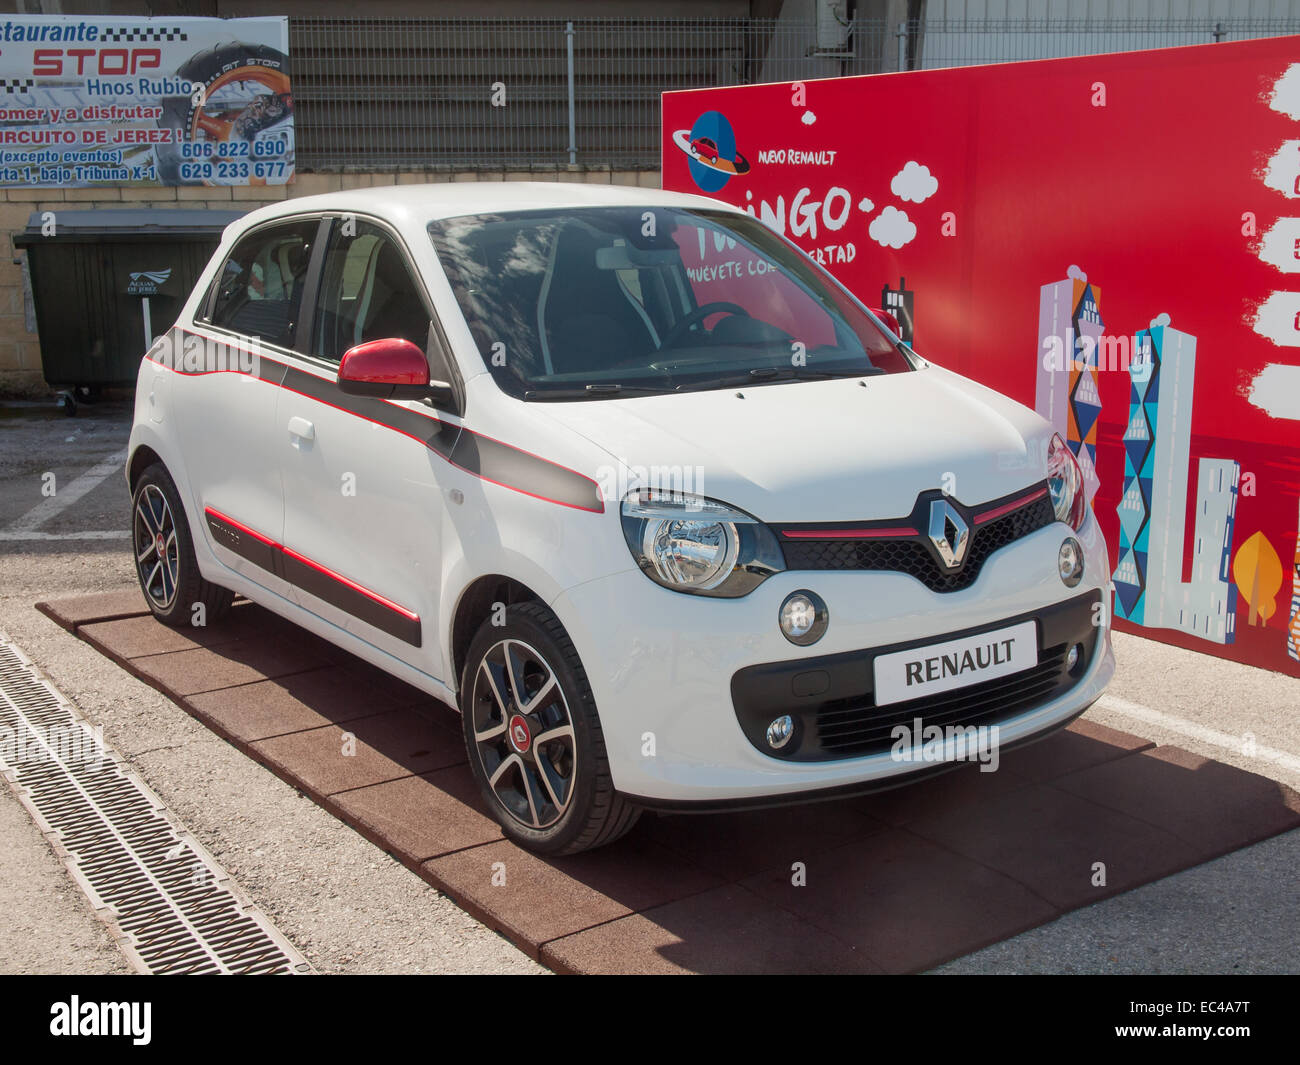 Renault's Twingo and Europe's Small Car Treats